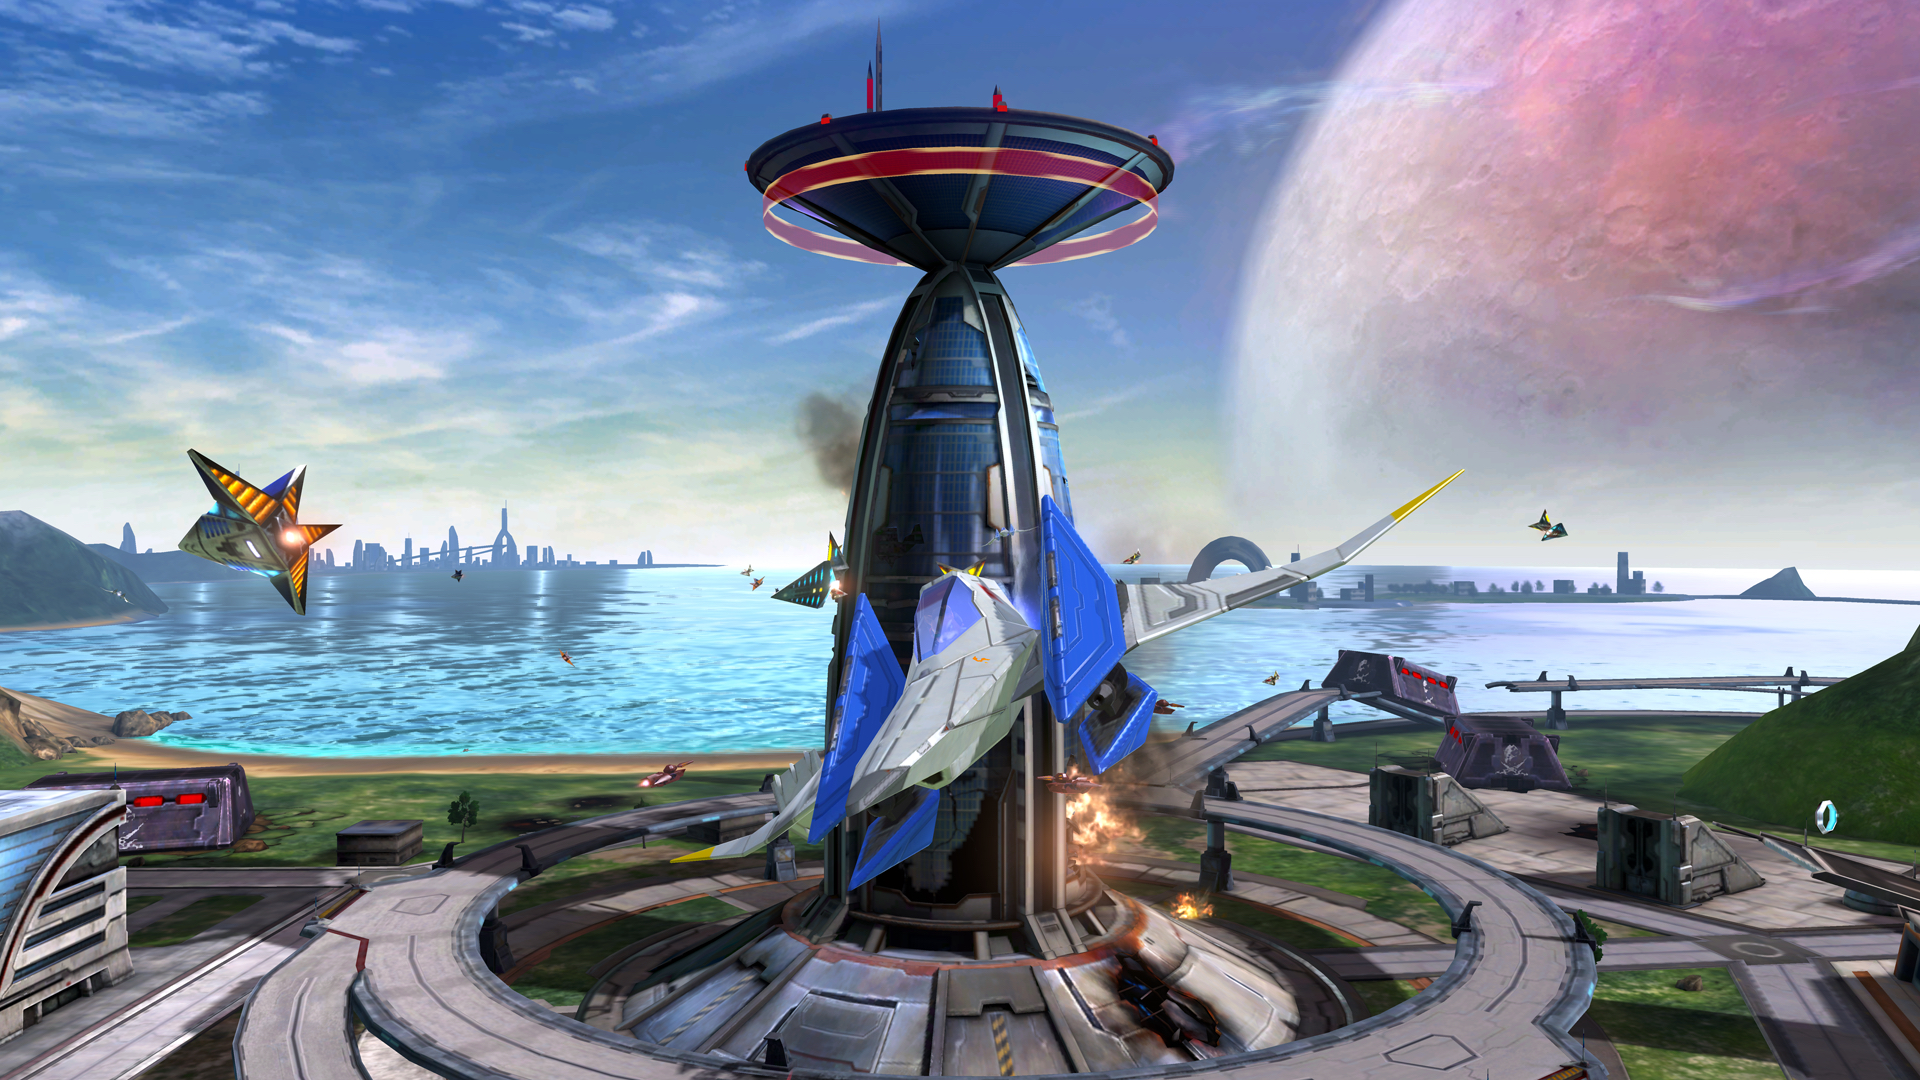 Star Fox Zero doesn't seem to have a whole lot going for it outside of its motion controls. 